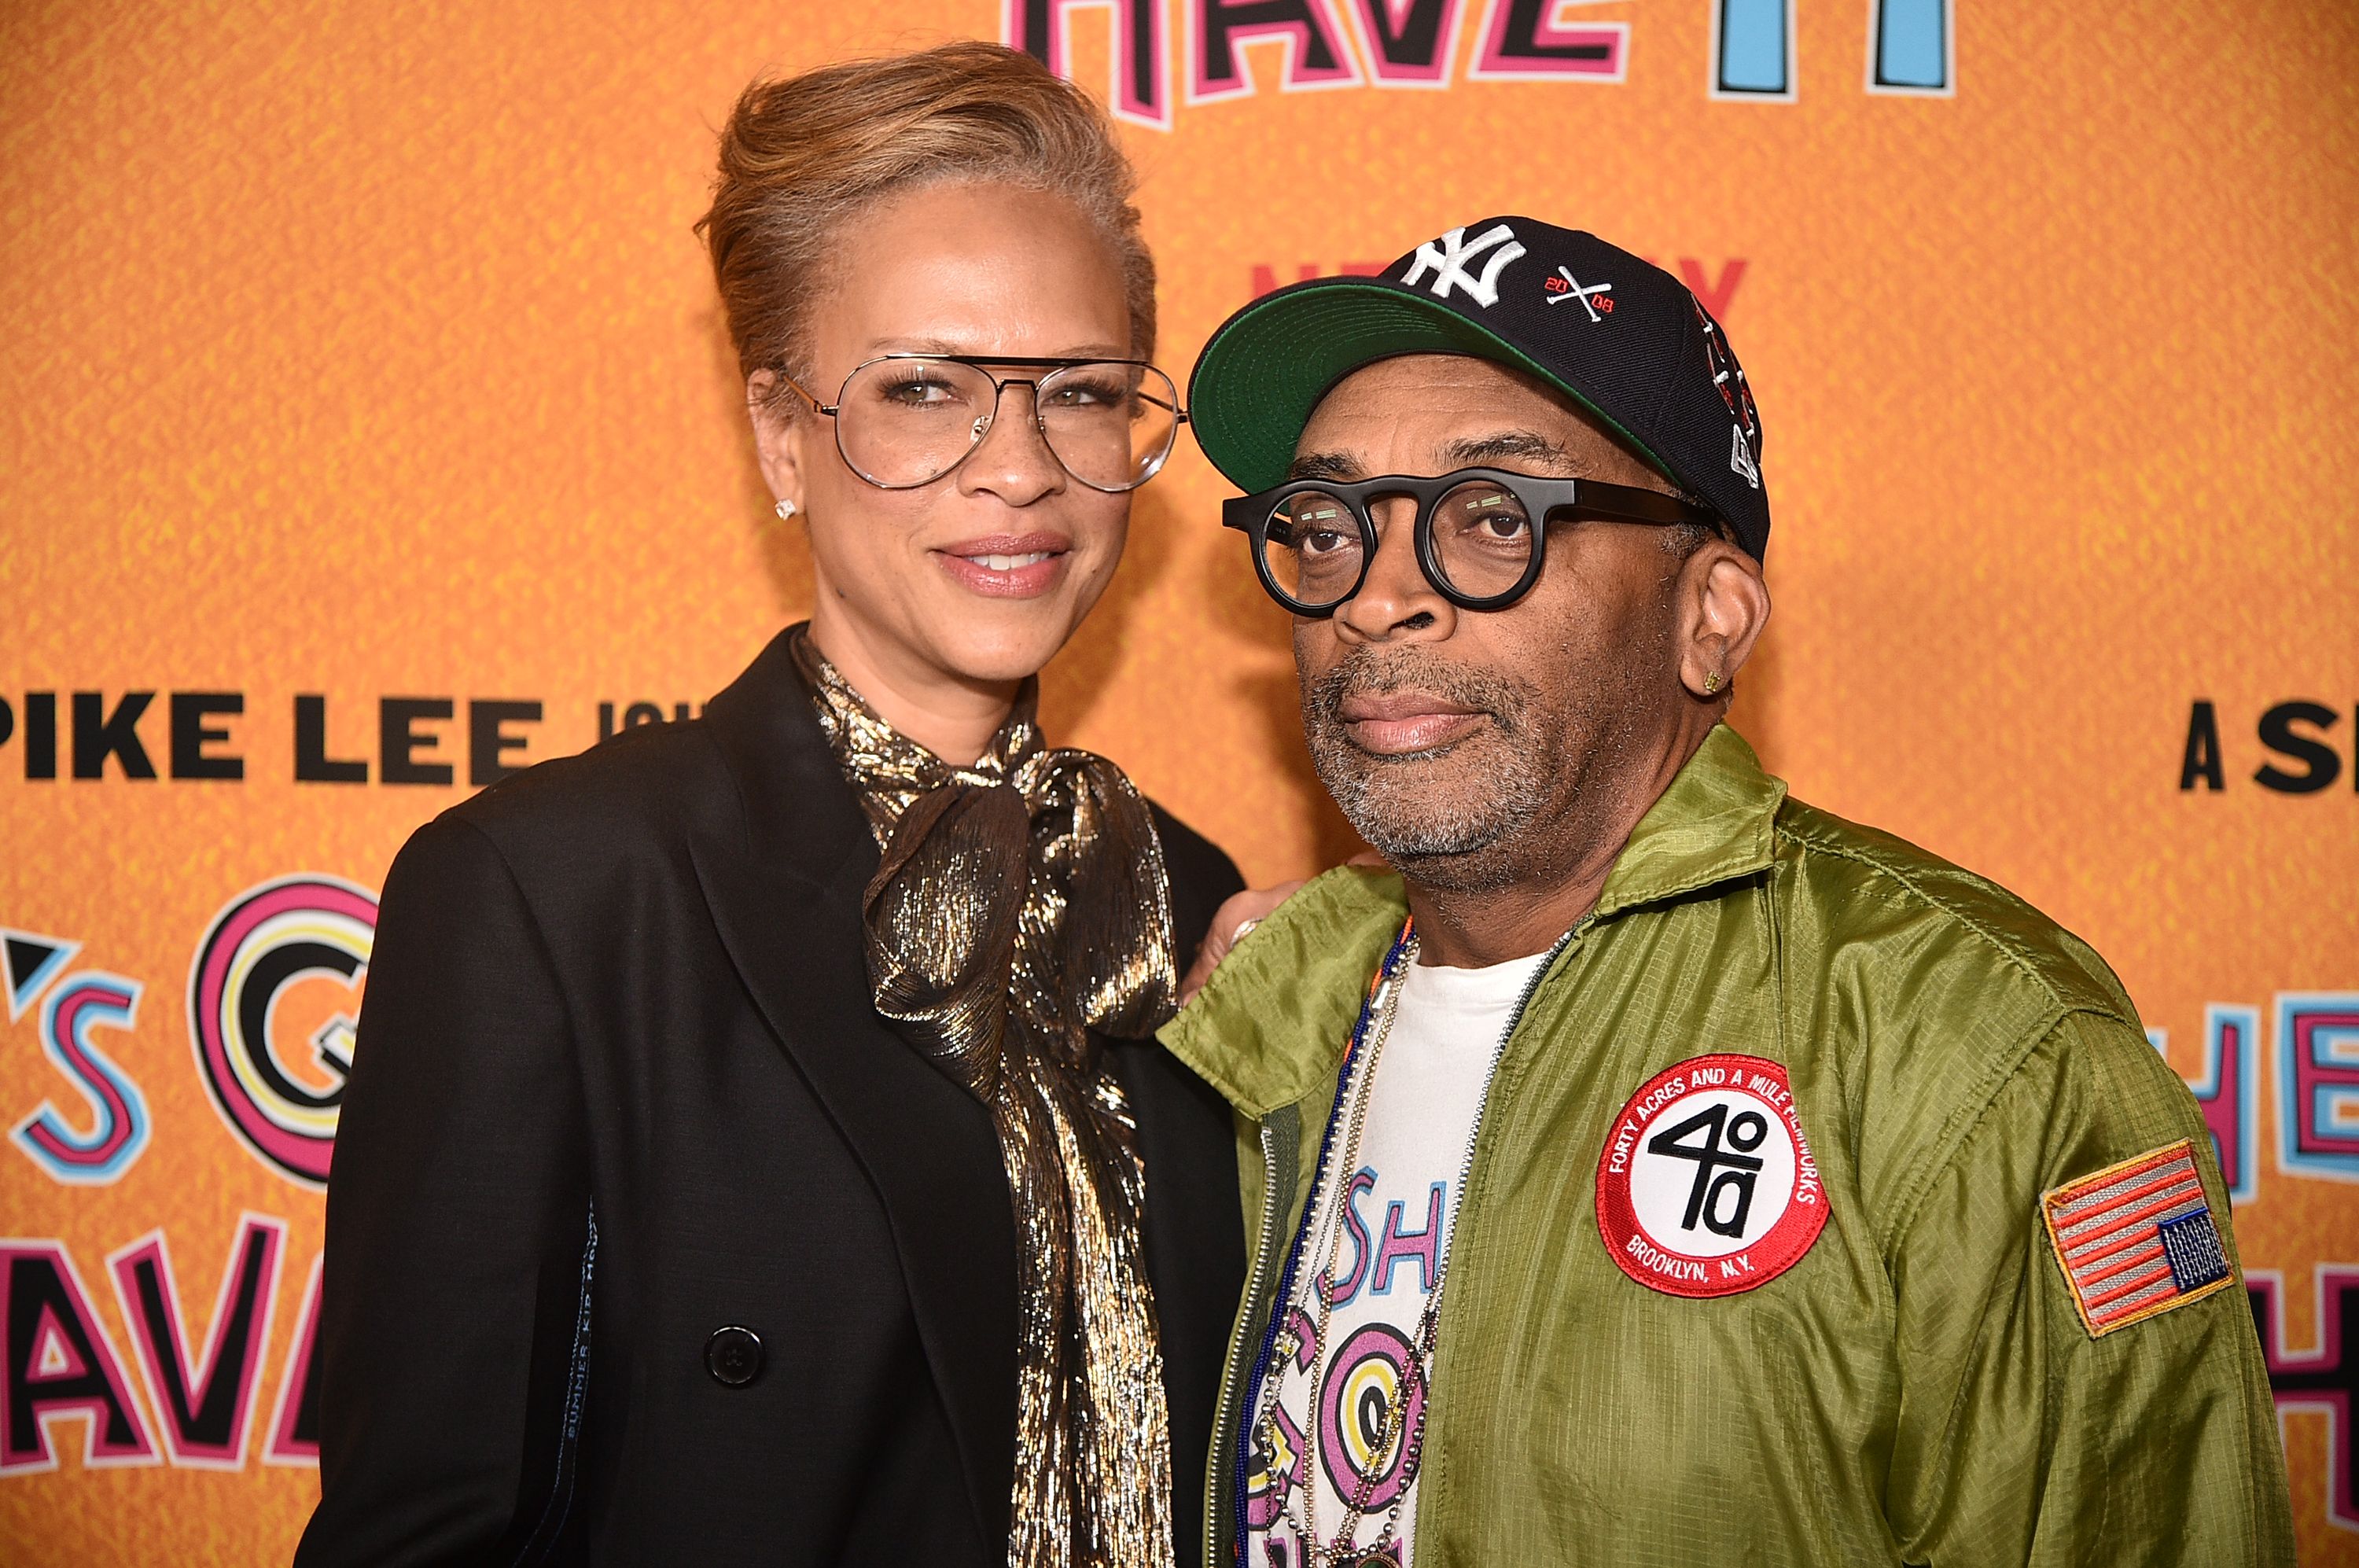 Tonya Lee Lewis and Spike Lee at the "She's Gotta Have It" Season 2 Premiere in 2019 in Brooklyn, New York | Source: Getty Images